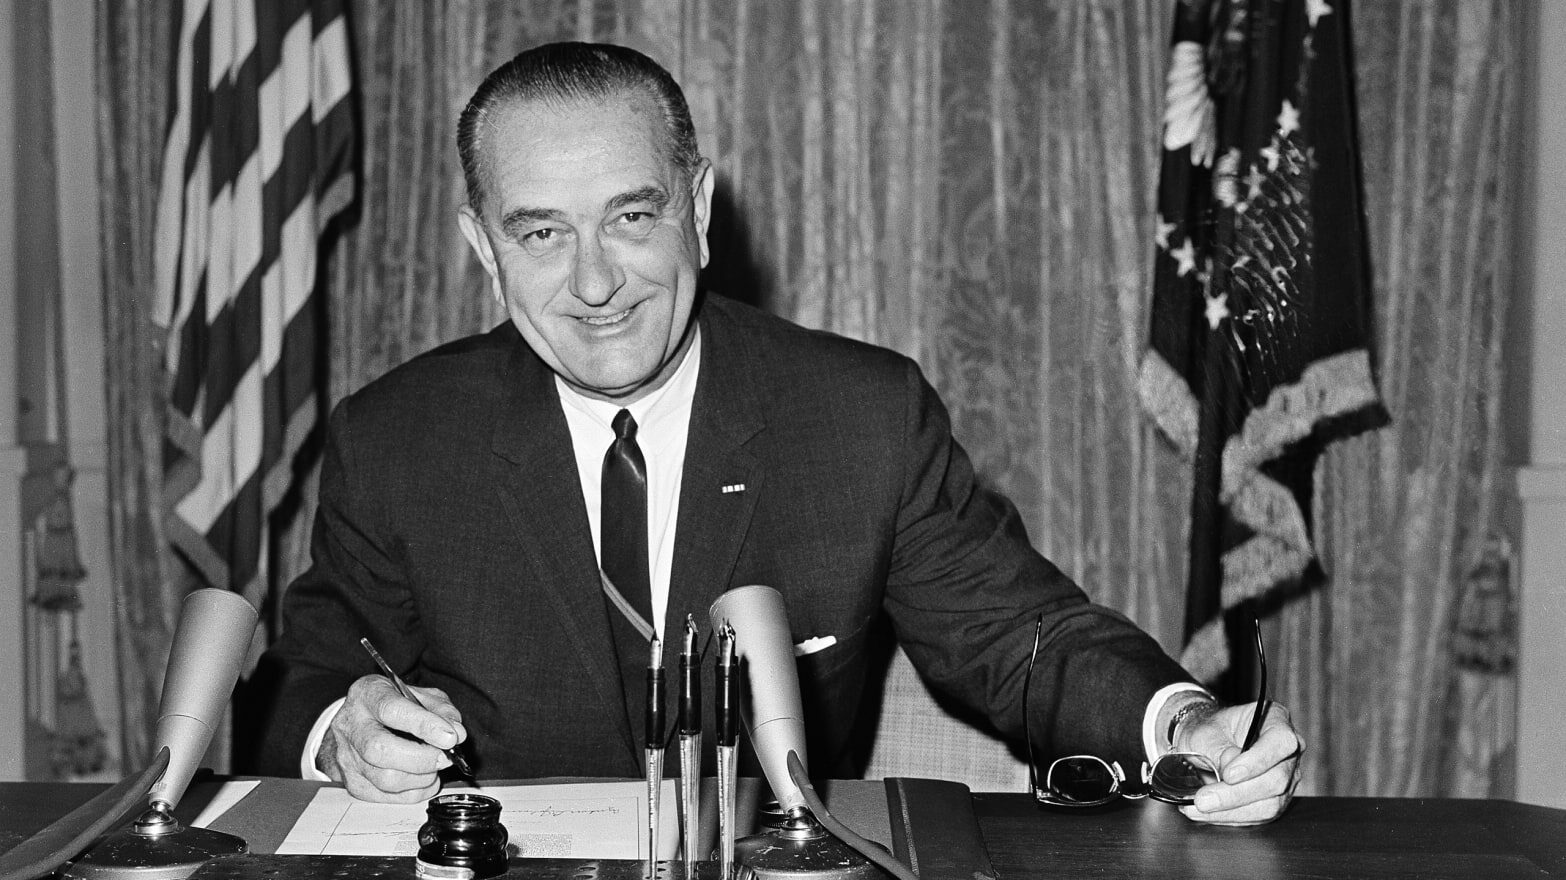 Lyndon Johnson’s “Great Society” on Voting Rights and the American Promise